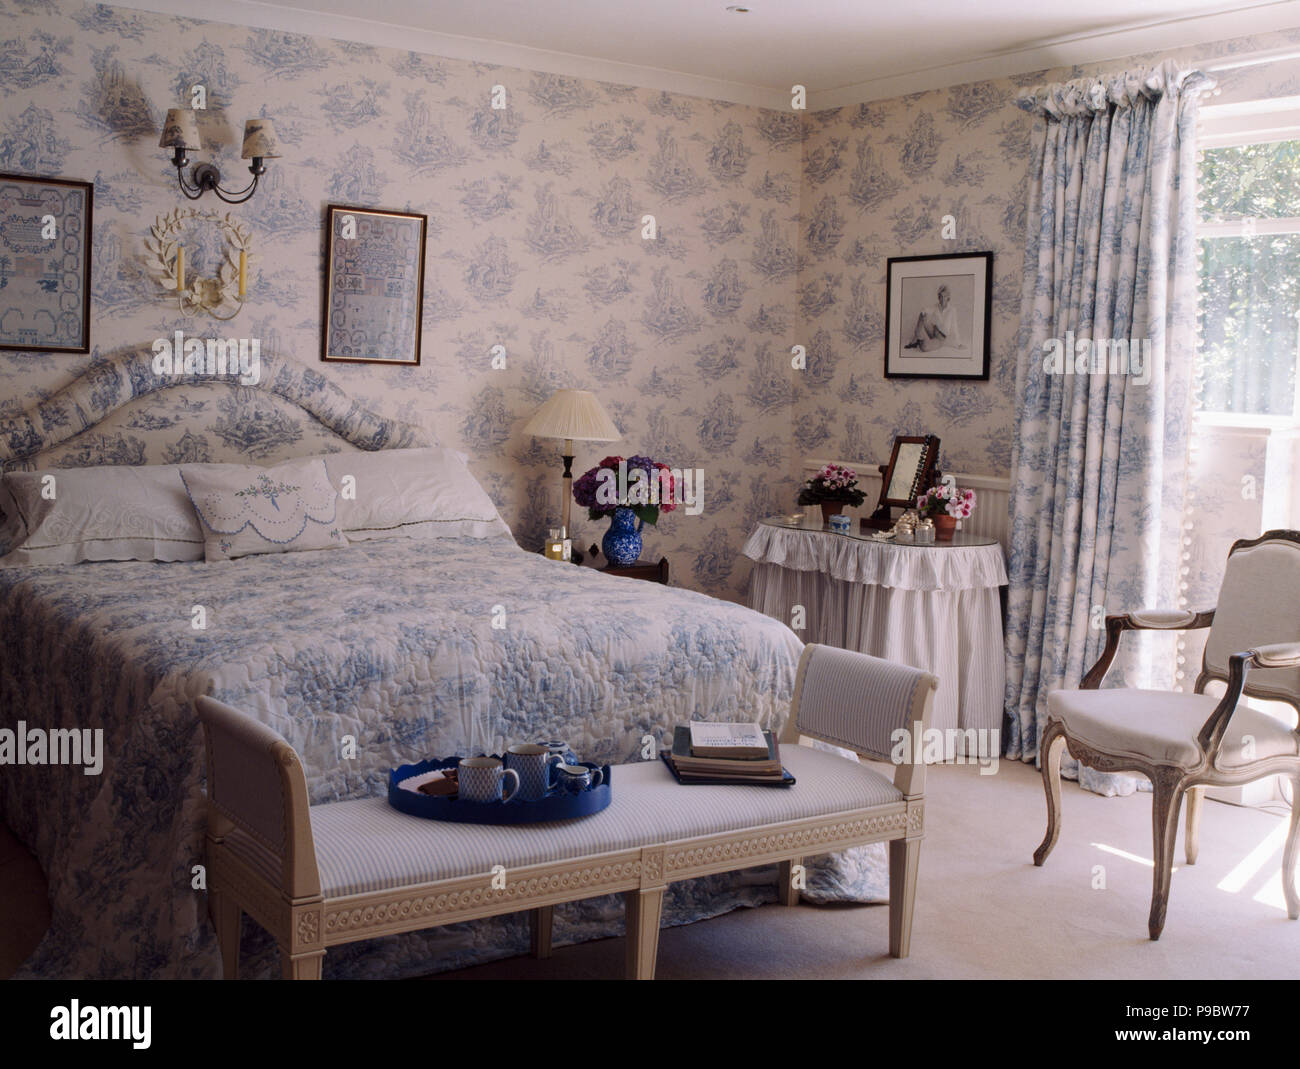 Blue+white Toile-de-Jouy wallpaper and curtains and bedlinen in country bedroom Stock Photo